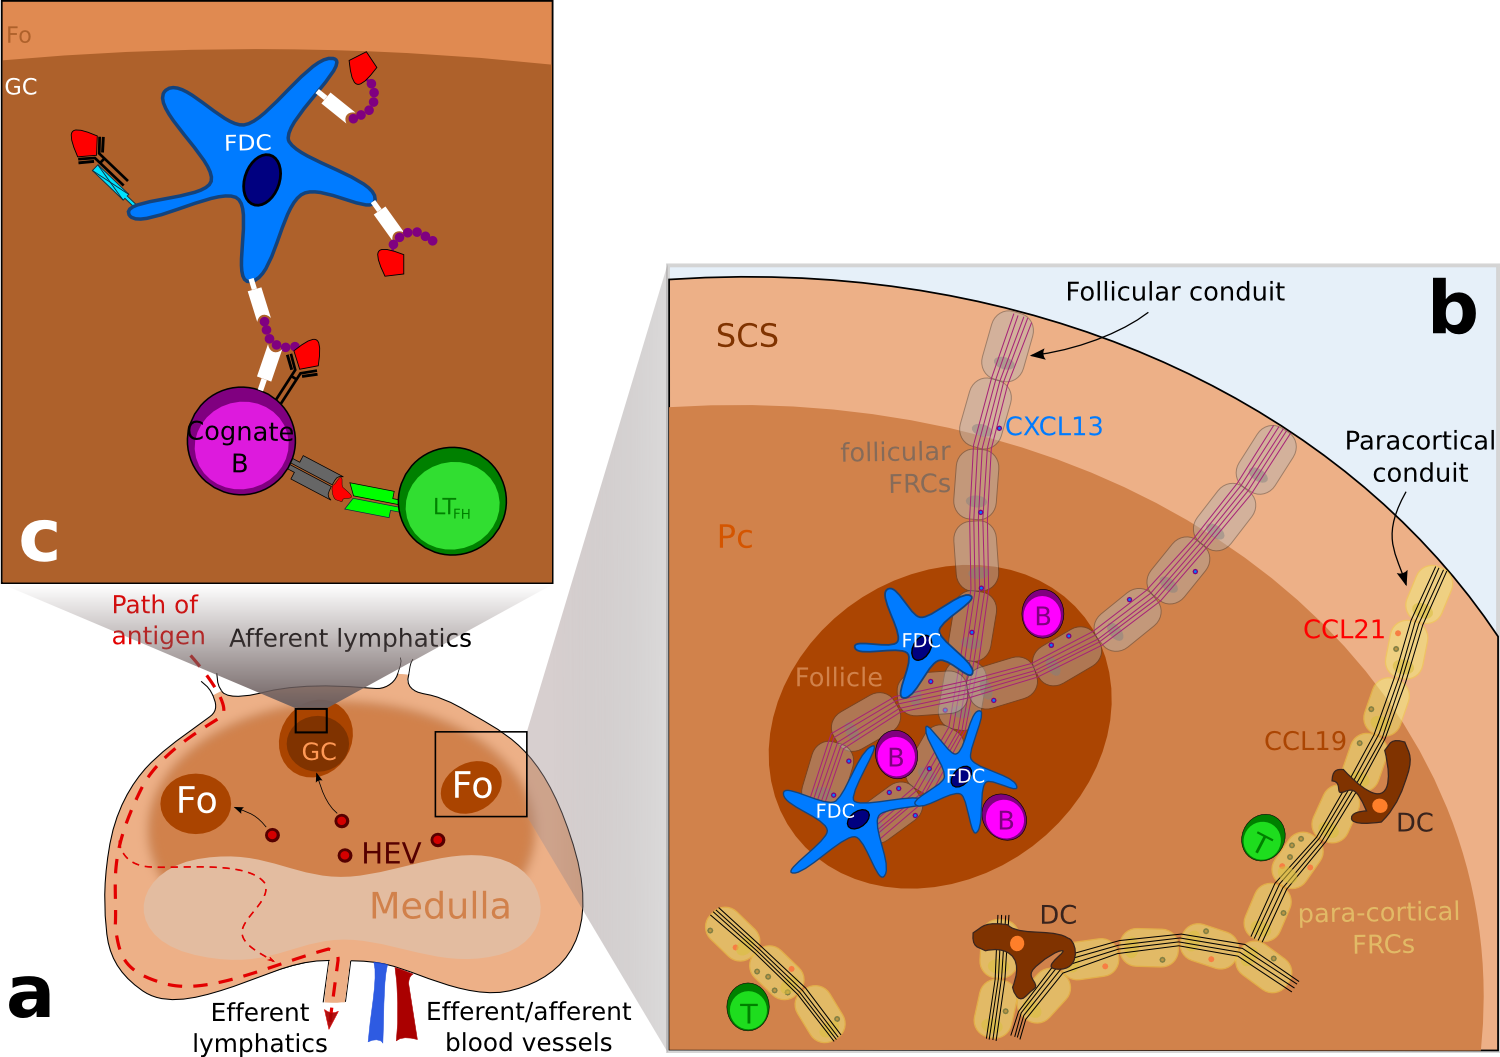 Schematic representation of the structure of a lymph node.